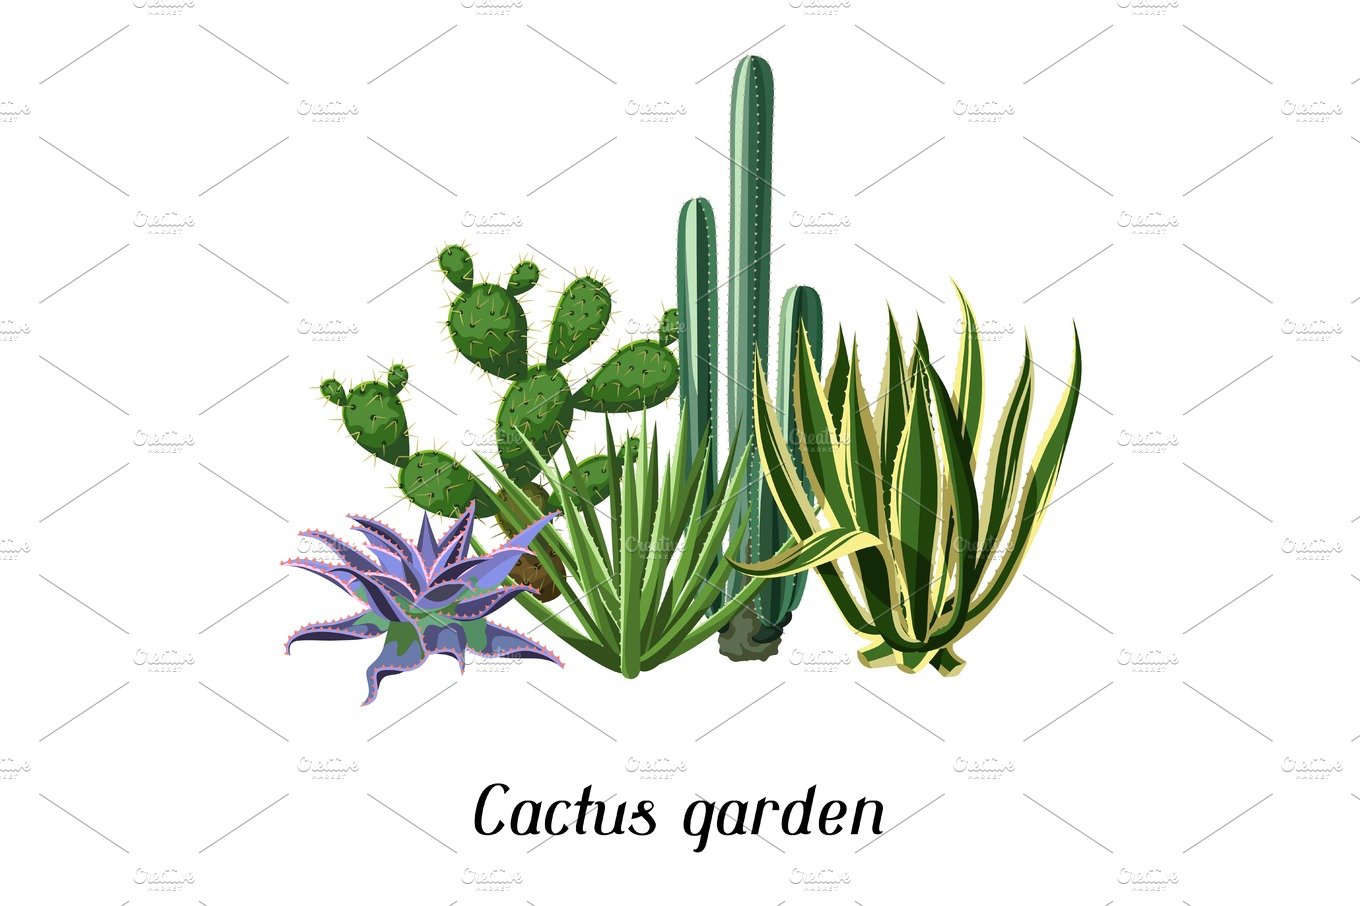 Variety of cactuses and succulents on a white background.